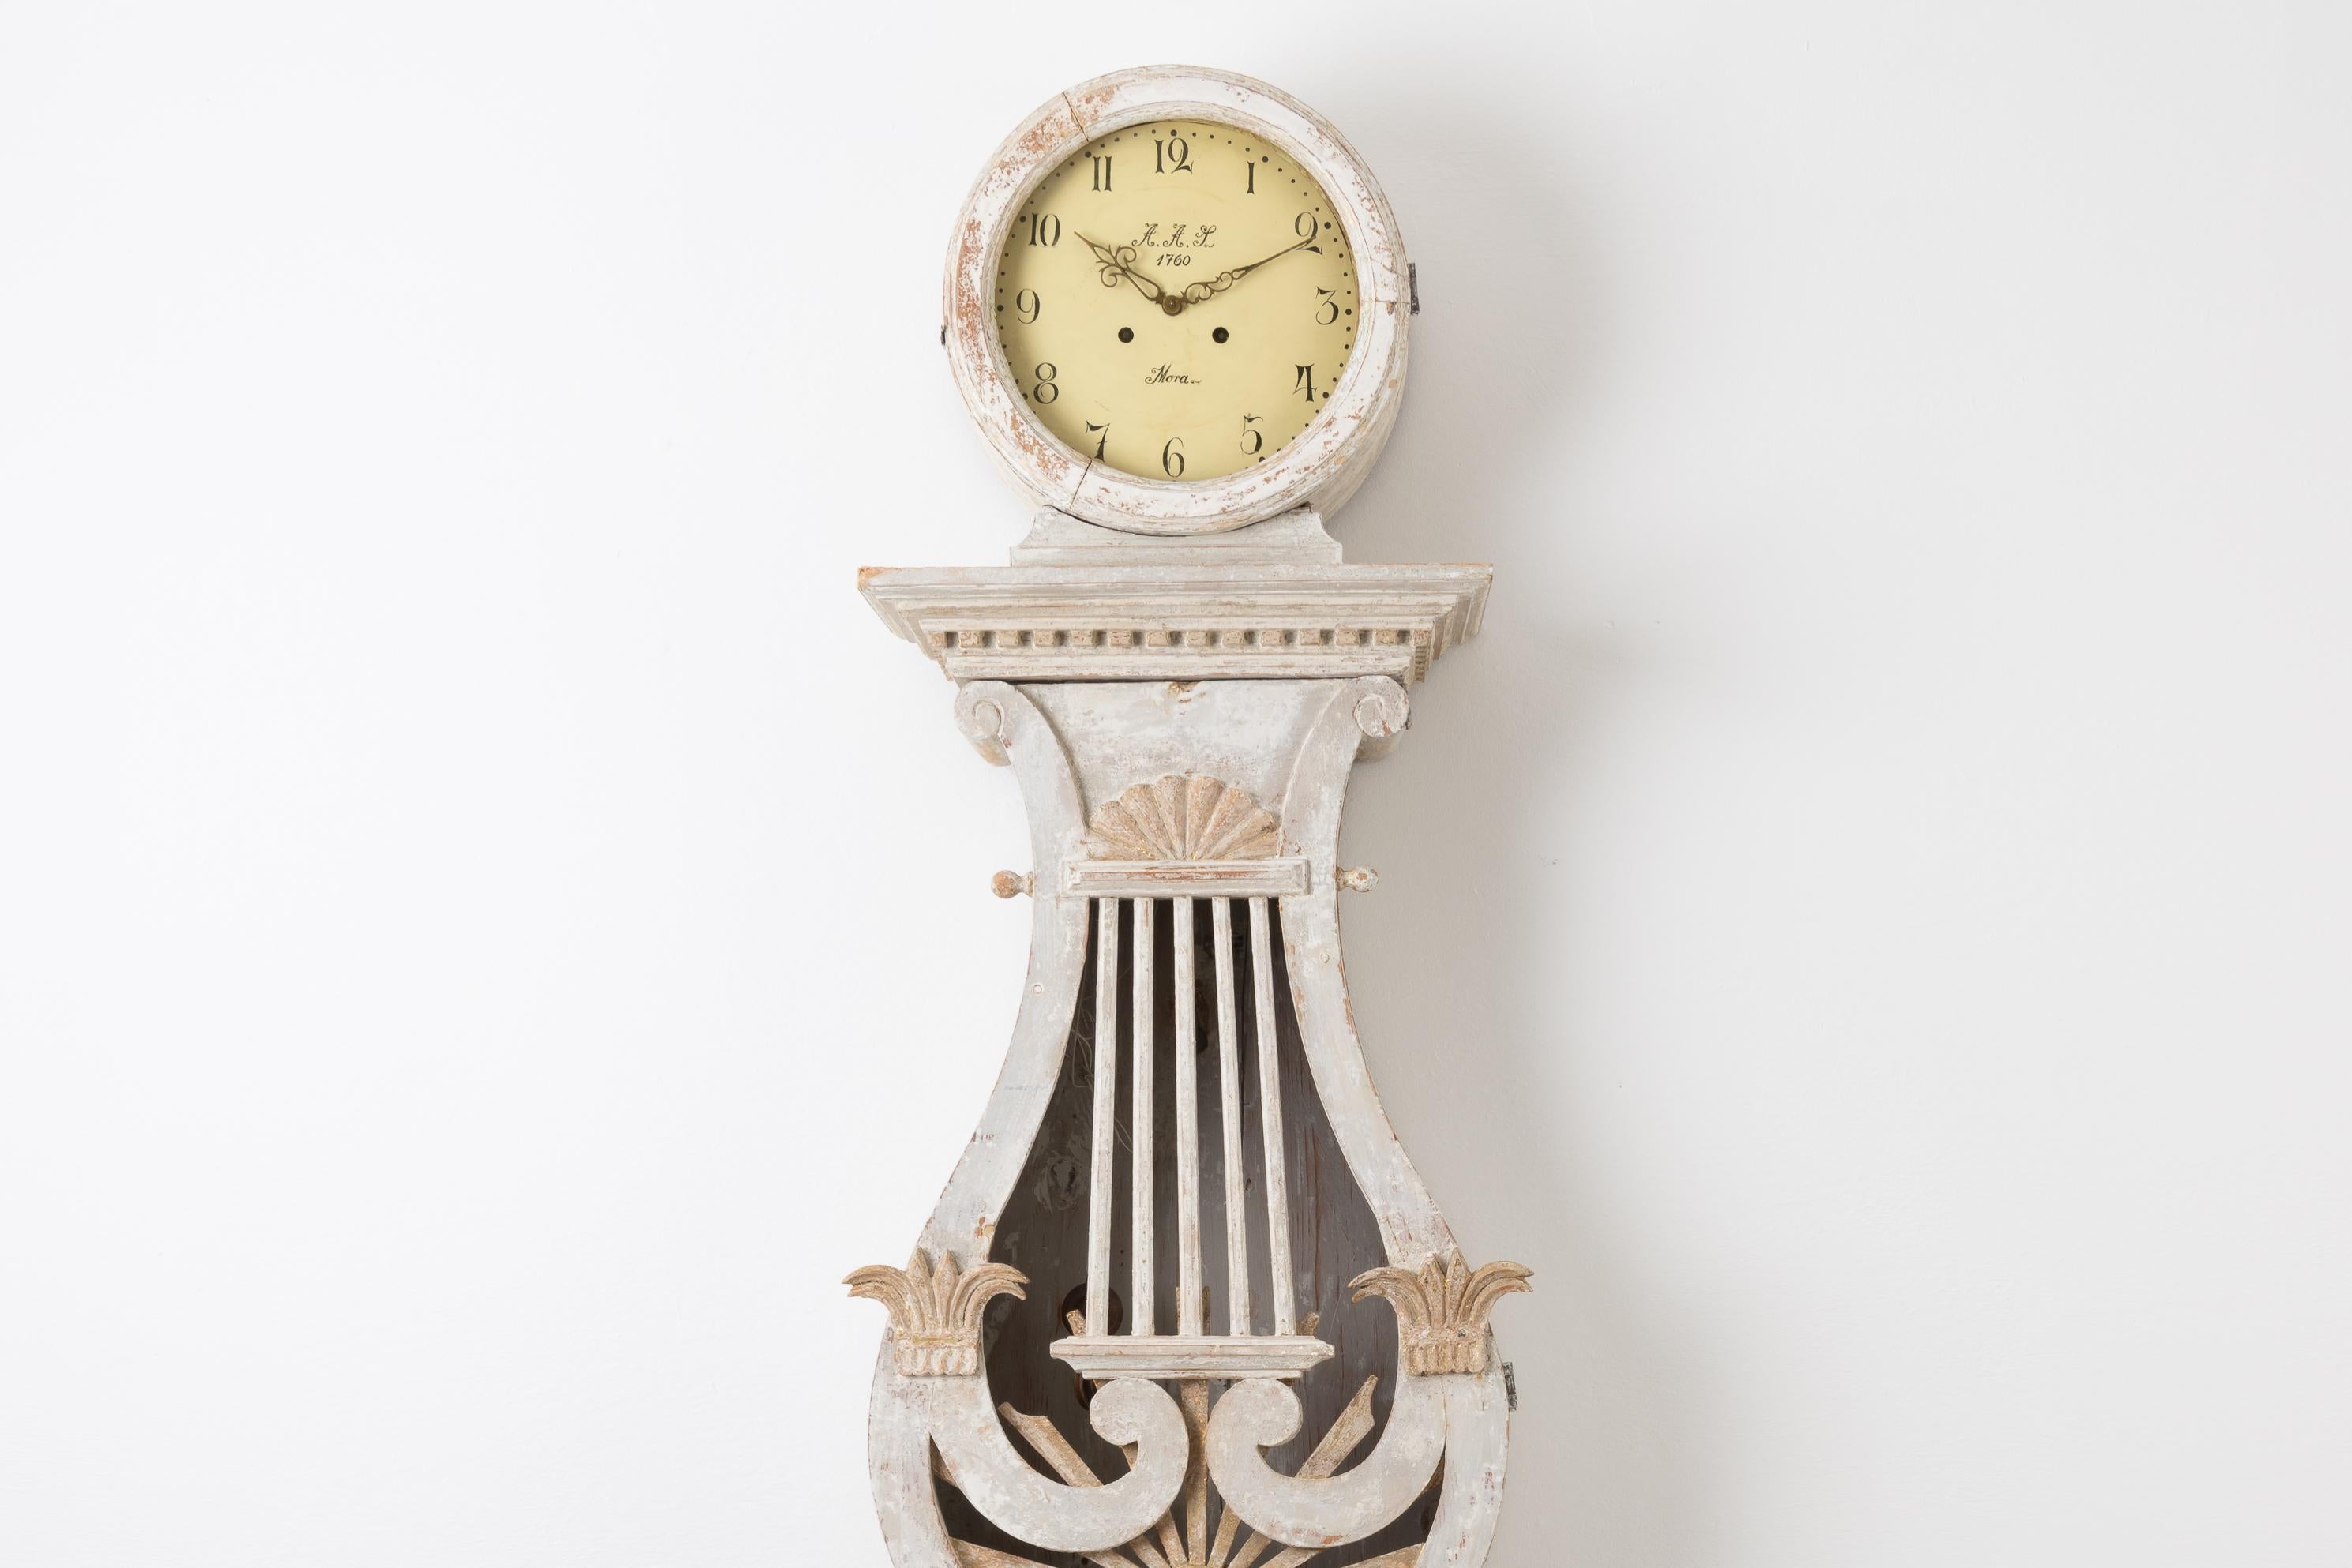 Swedish Empire long case clock from the early 1800s. The clock is made between 1820 and 1840 in pine with old distressed paint. The model is rare with a cutout design on the door. The clock comes with the original mechanism, weights and pendulum.